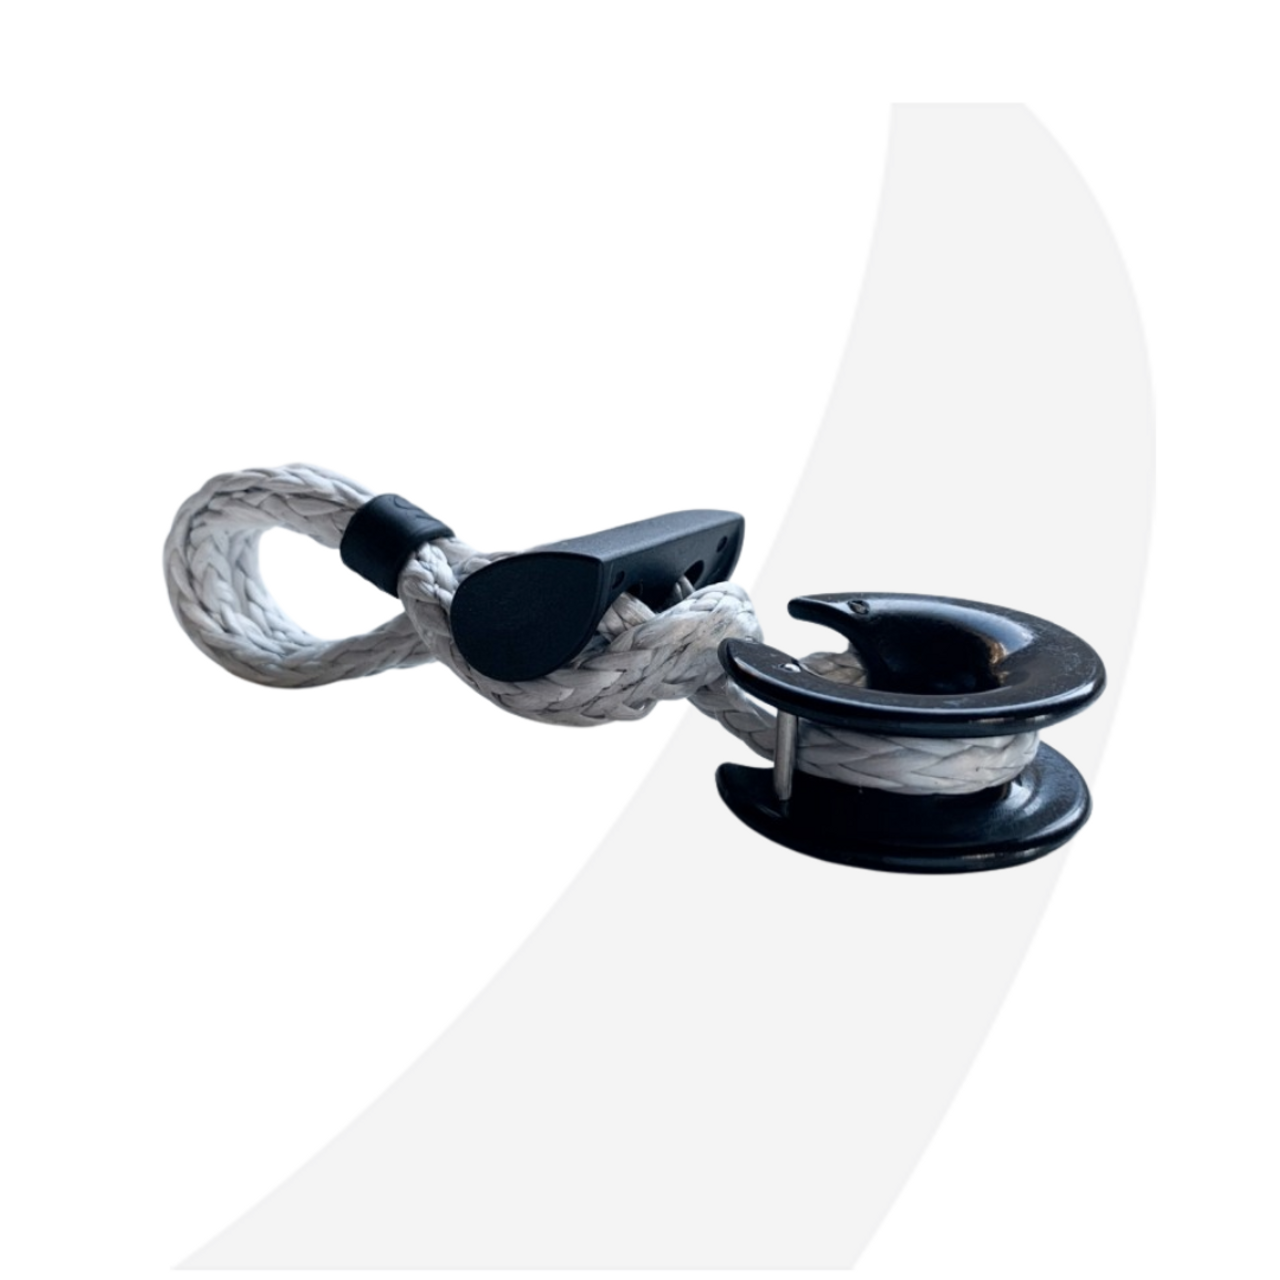 Low friction open ring - Karver - Deck fittings -Ino-Rope online shop